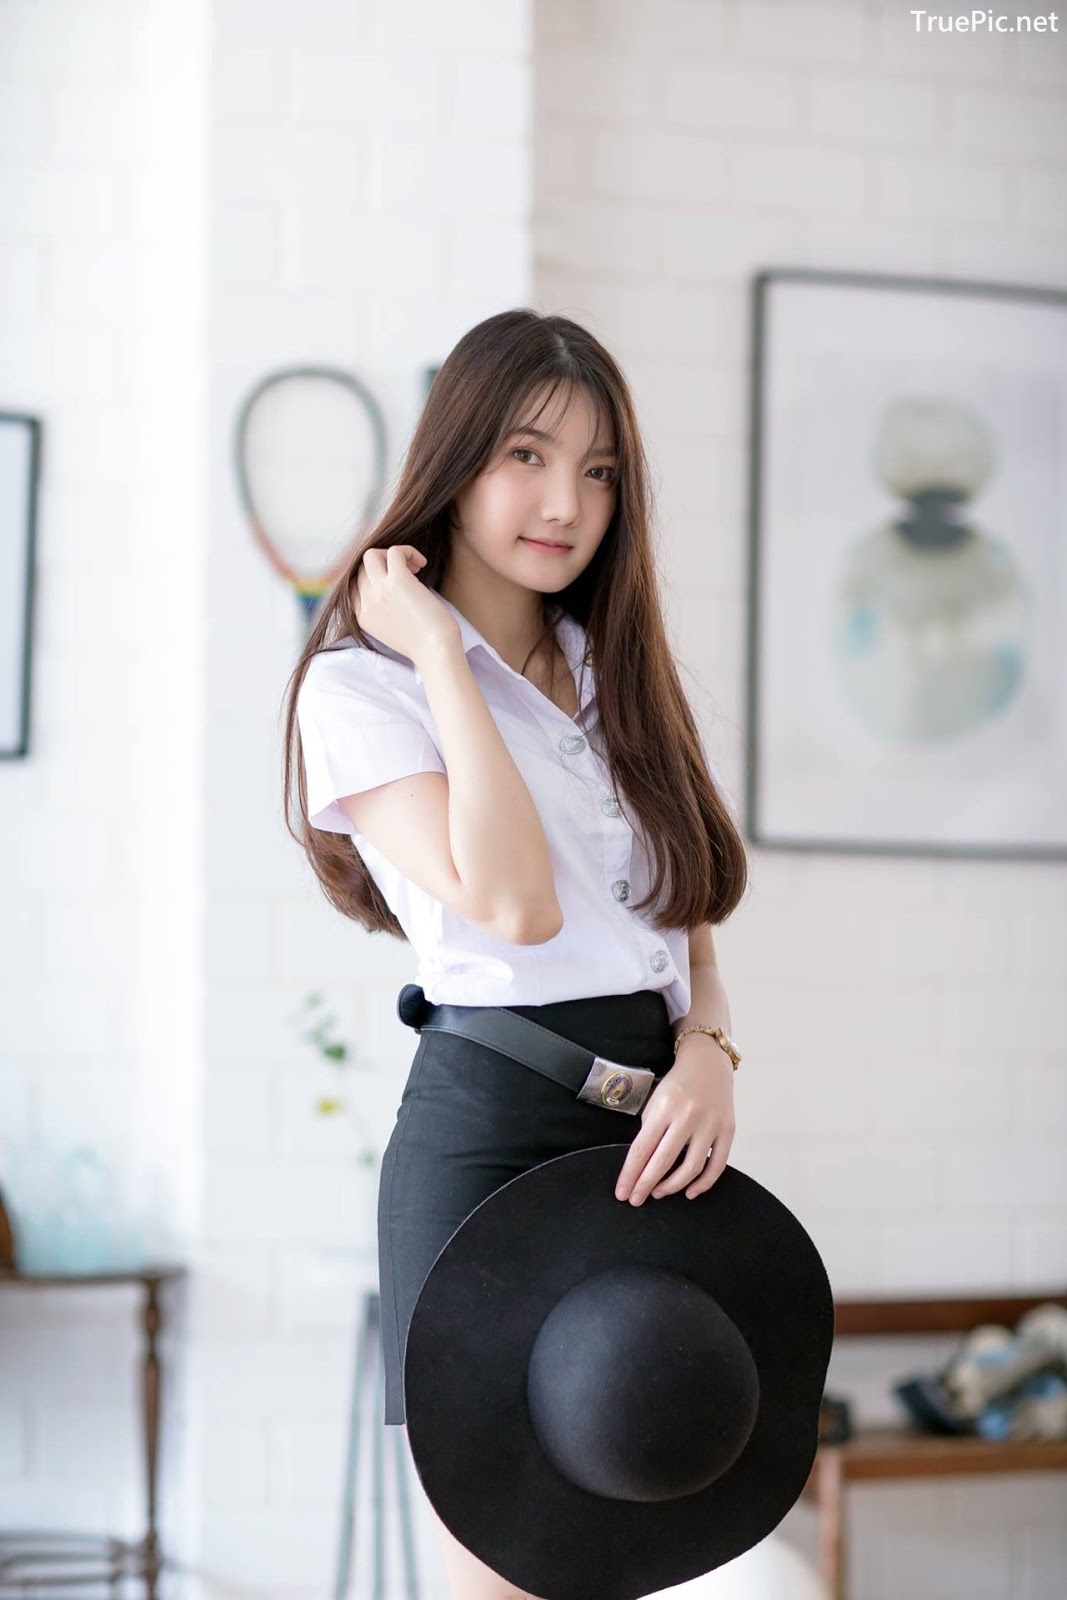 Image-Thailand-Cute-Model-Creammy-Chanama-Concept-Innocent-Student-Girl-TruePic.net- Picture-26